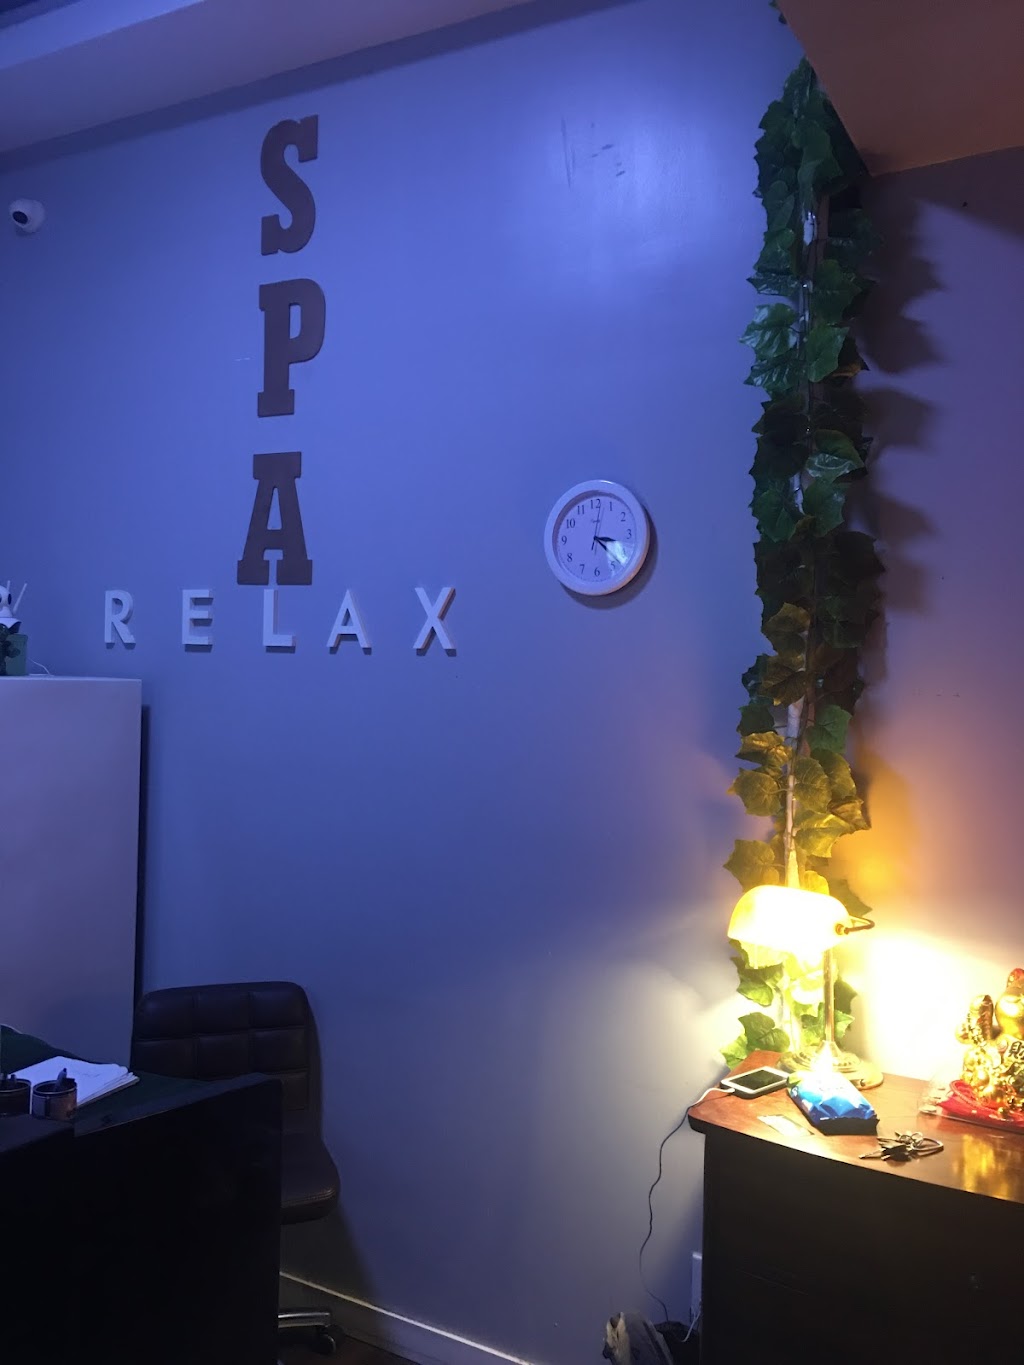 Spa Relaxing | 5419 4th Ave, Brooklyn, NY 11220 | Phone: (917) 349-5203